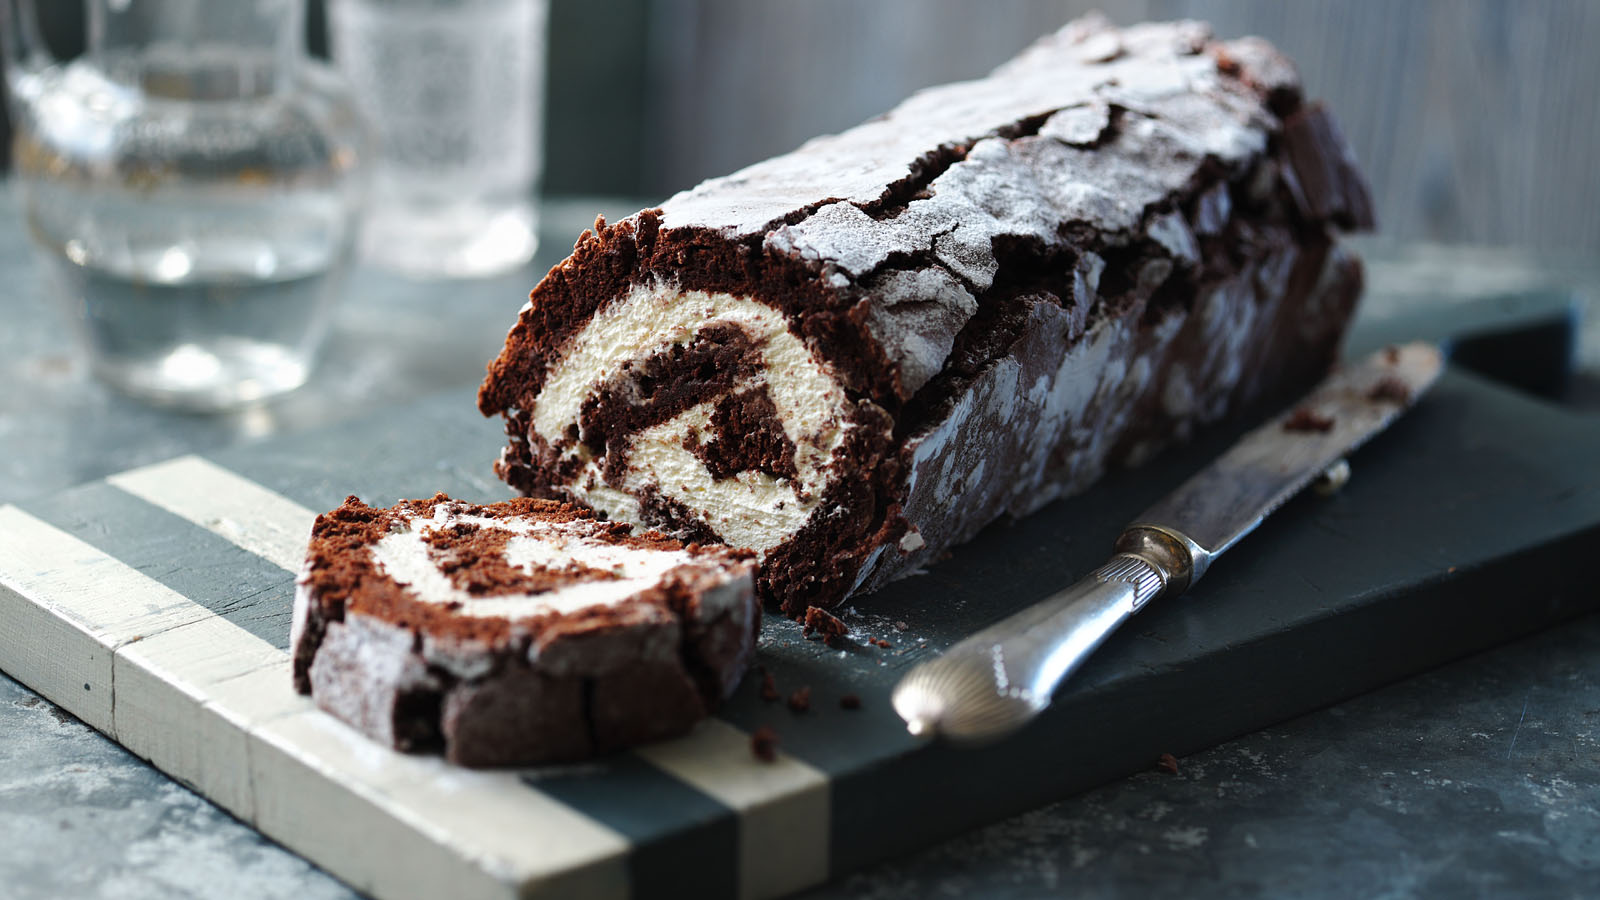 Chocolate and Chestnut Yule Log - Del's cooking twist